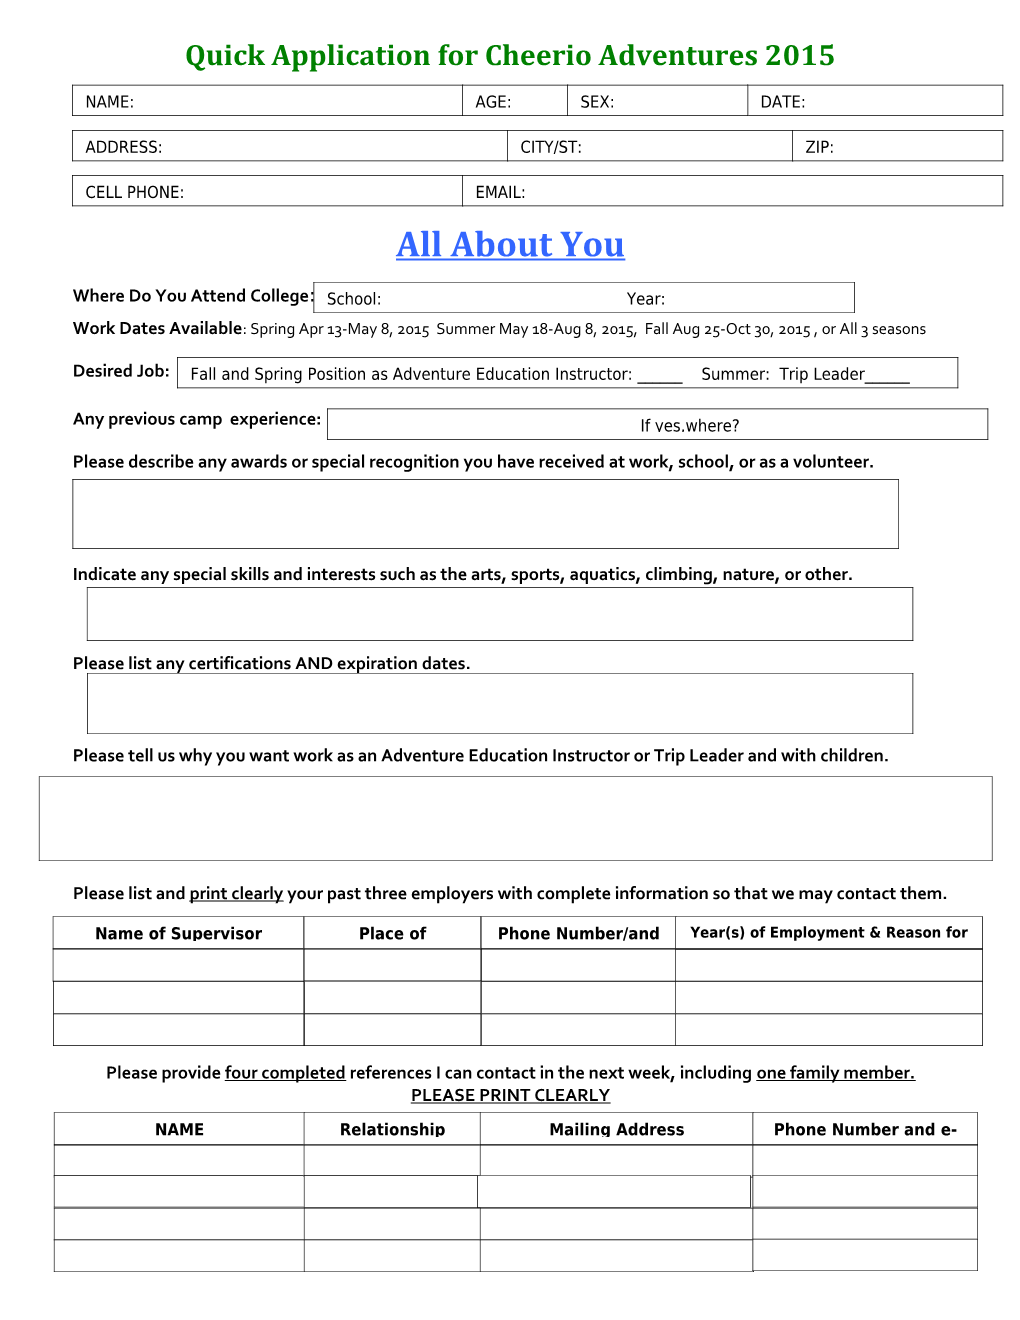 Quick Application for YMCA Summer Camp Jobs